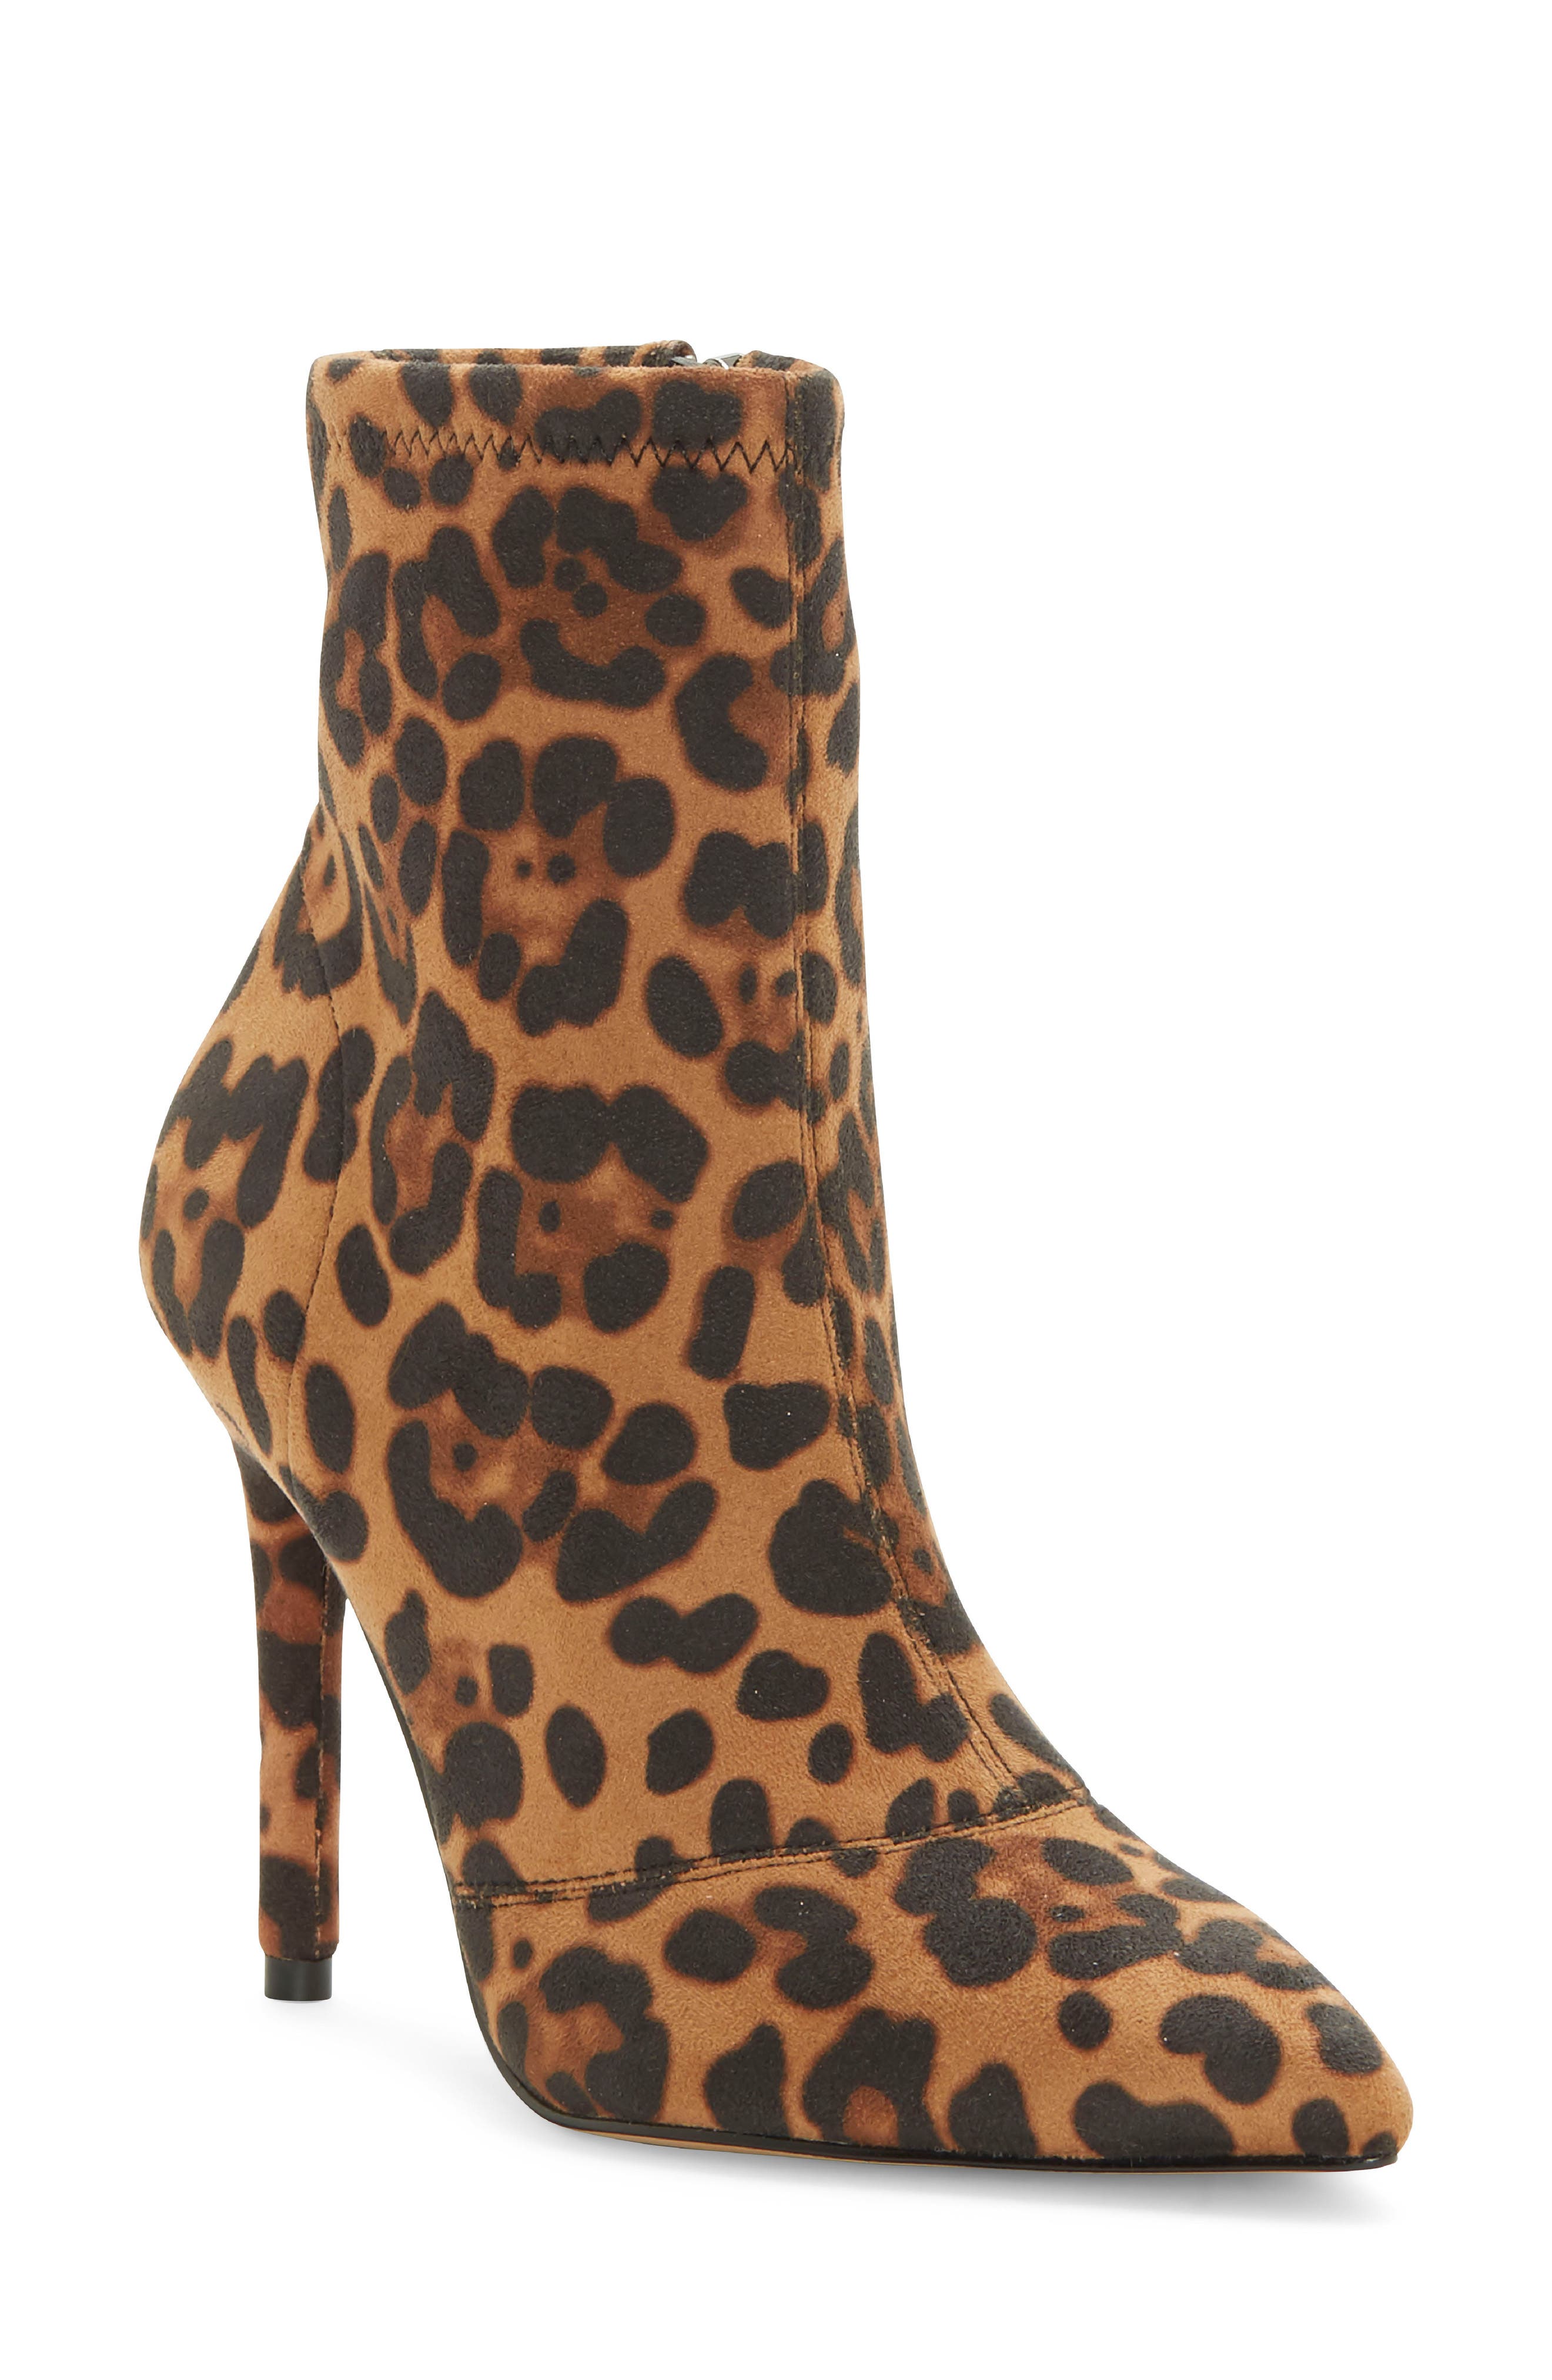 Jessica Simpson | Lailra Pointed Toe Stiletto Boot | Nordstrom Rack